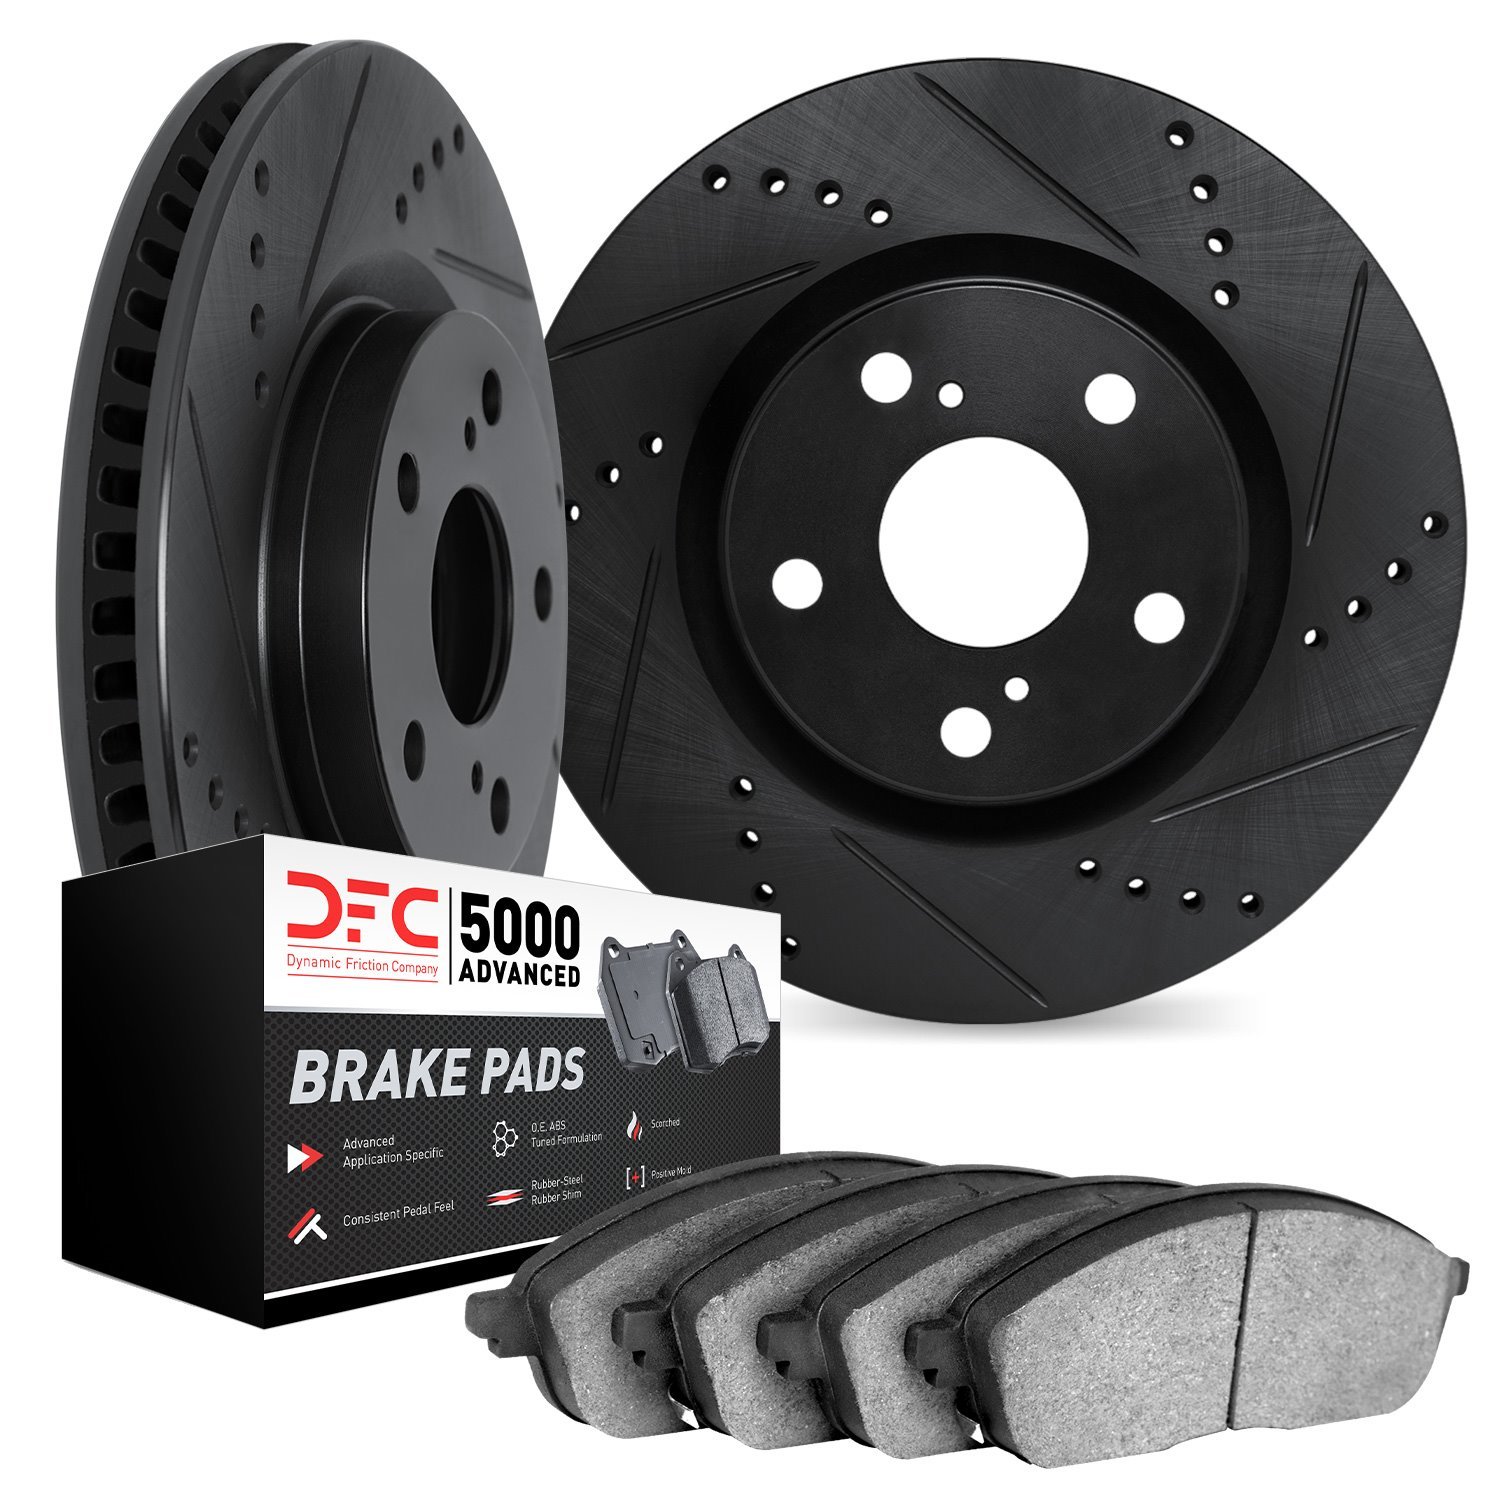 8502-80090 Drilled/Slotted Brake Rotors w/5000 Advanced Brake Pads Kit [Black], Fits Select Ford/Lincoln/Mercury/Mazda, Position